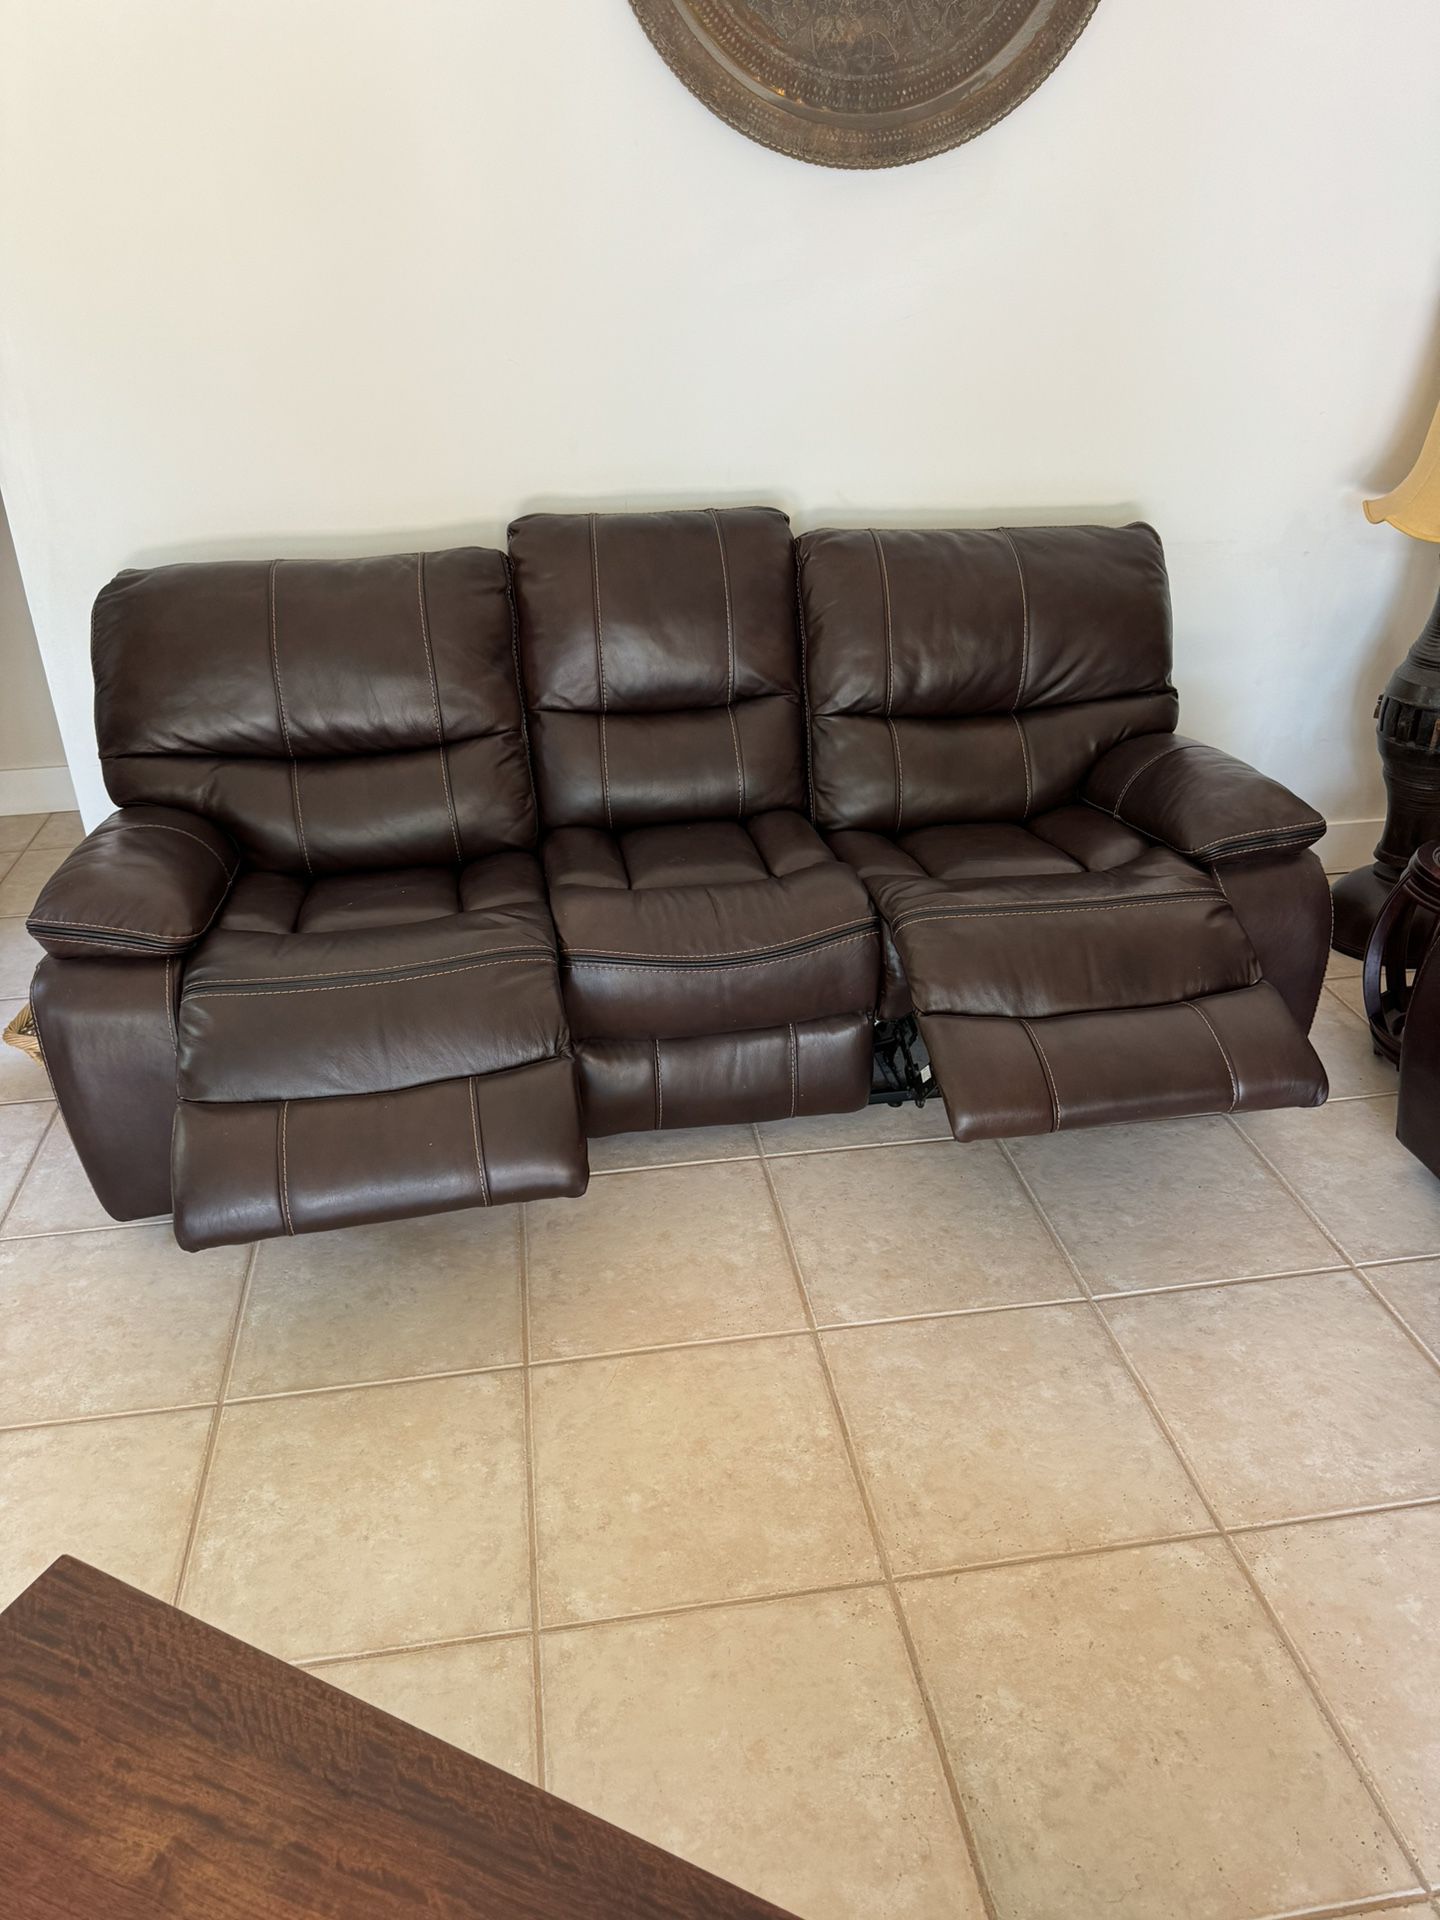 Two Recliner Couches 